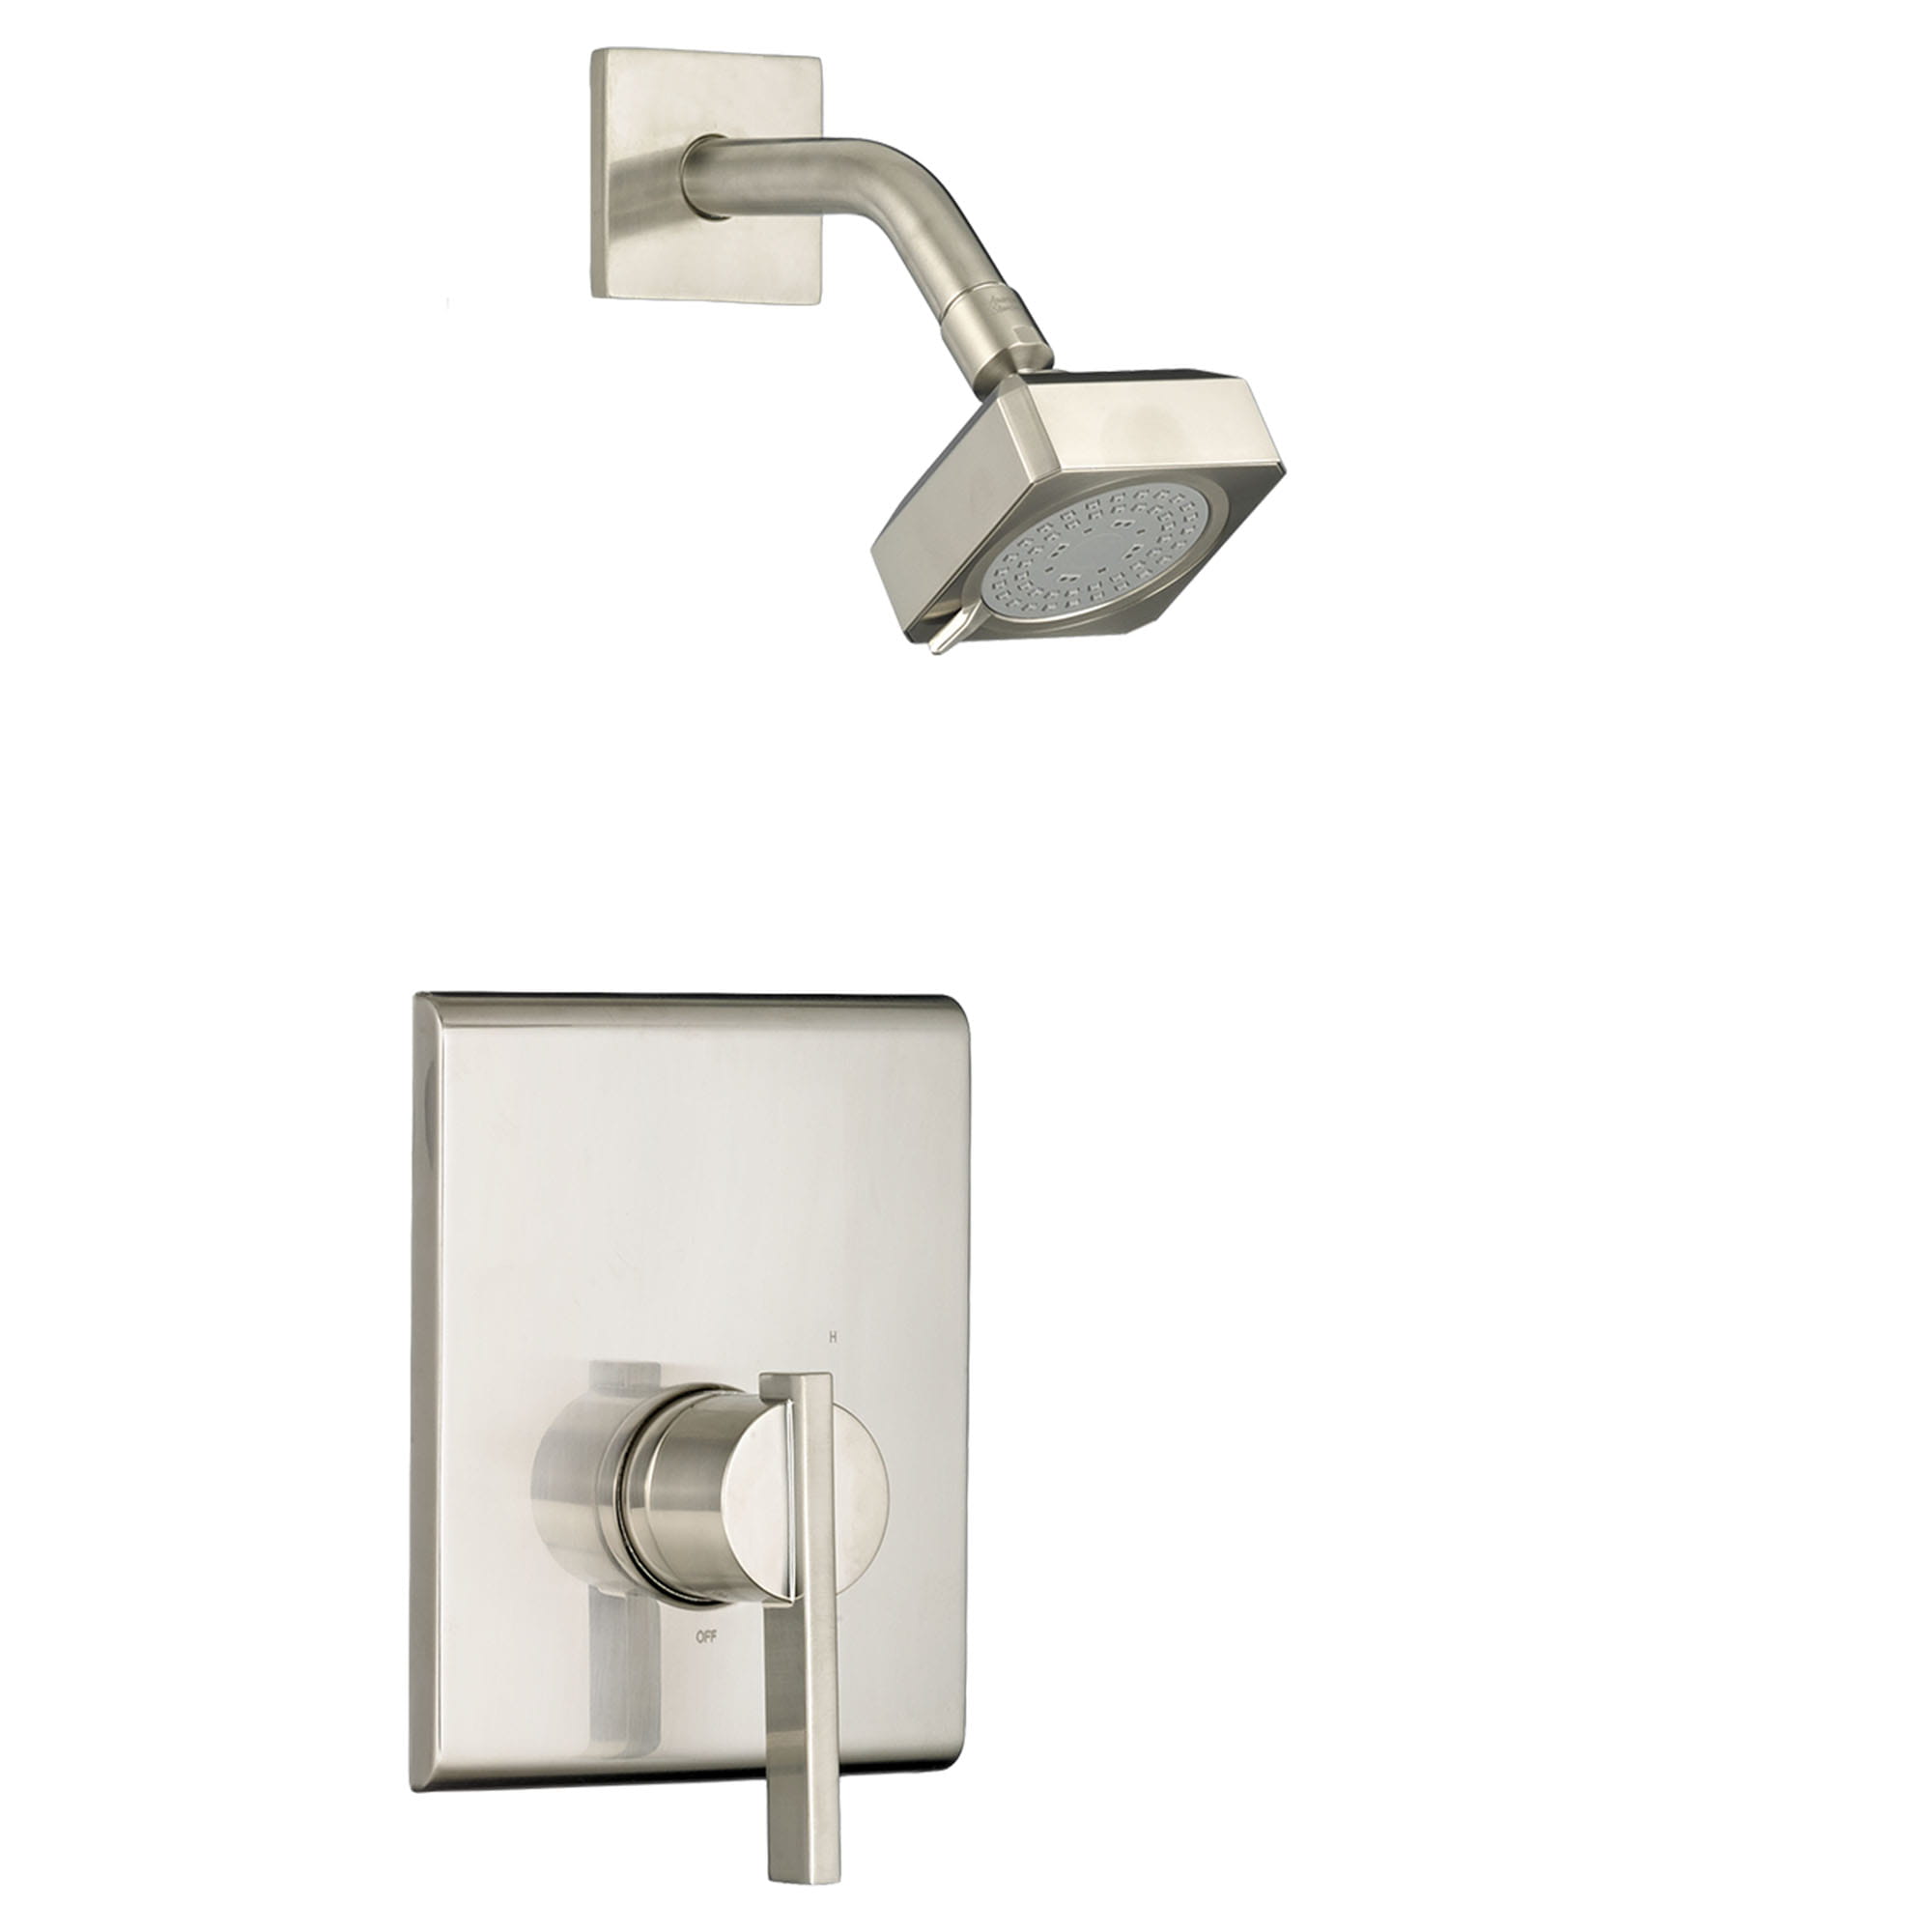 Times Square 20 GPM Shower Trim Kit with FloWise Showerhead and Lever Handle   BRUSHED NICKEL